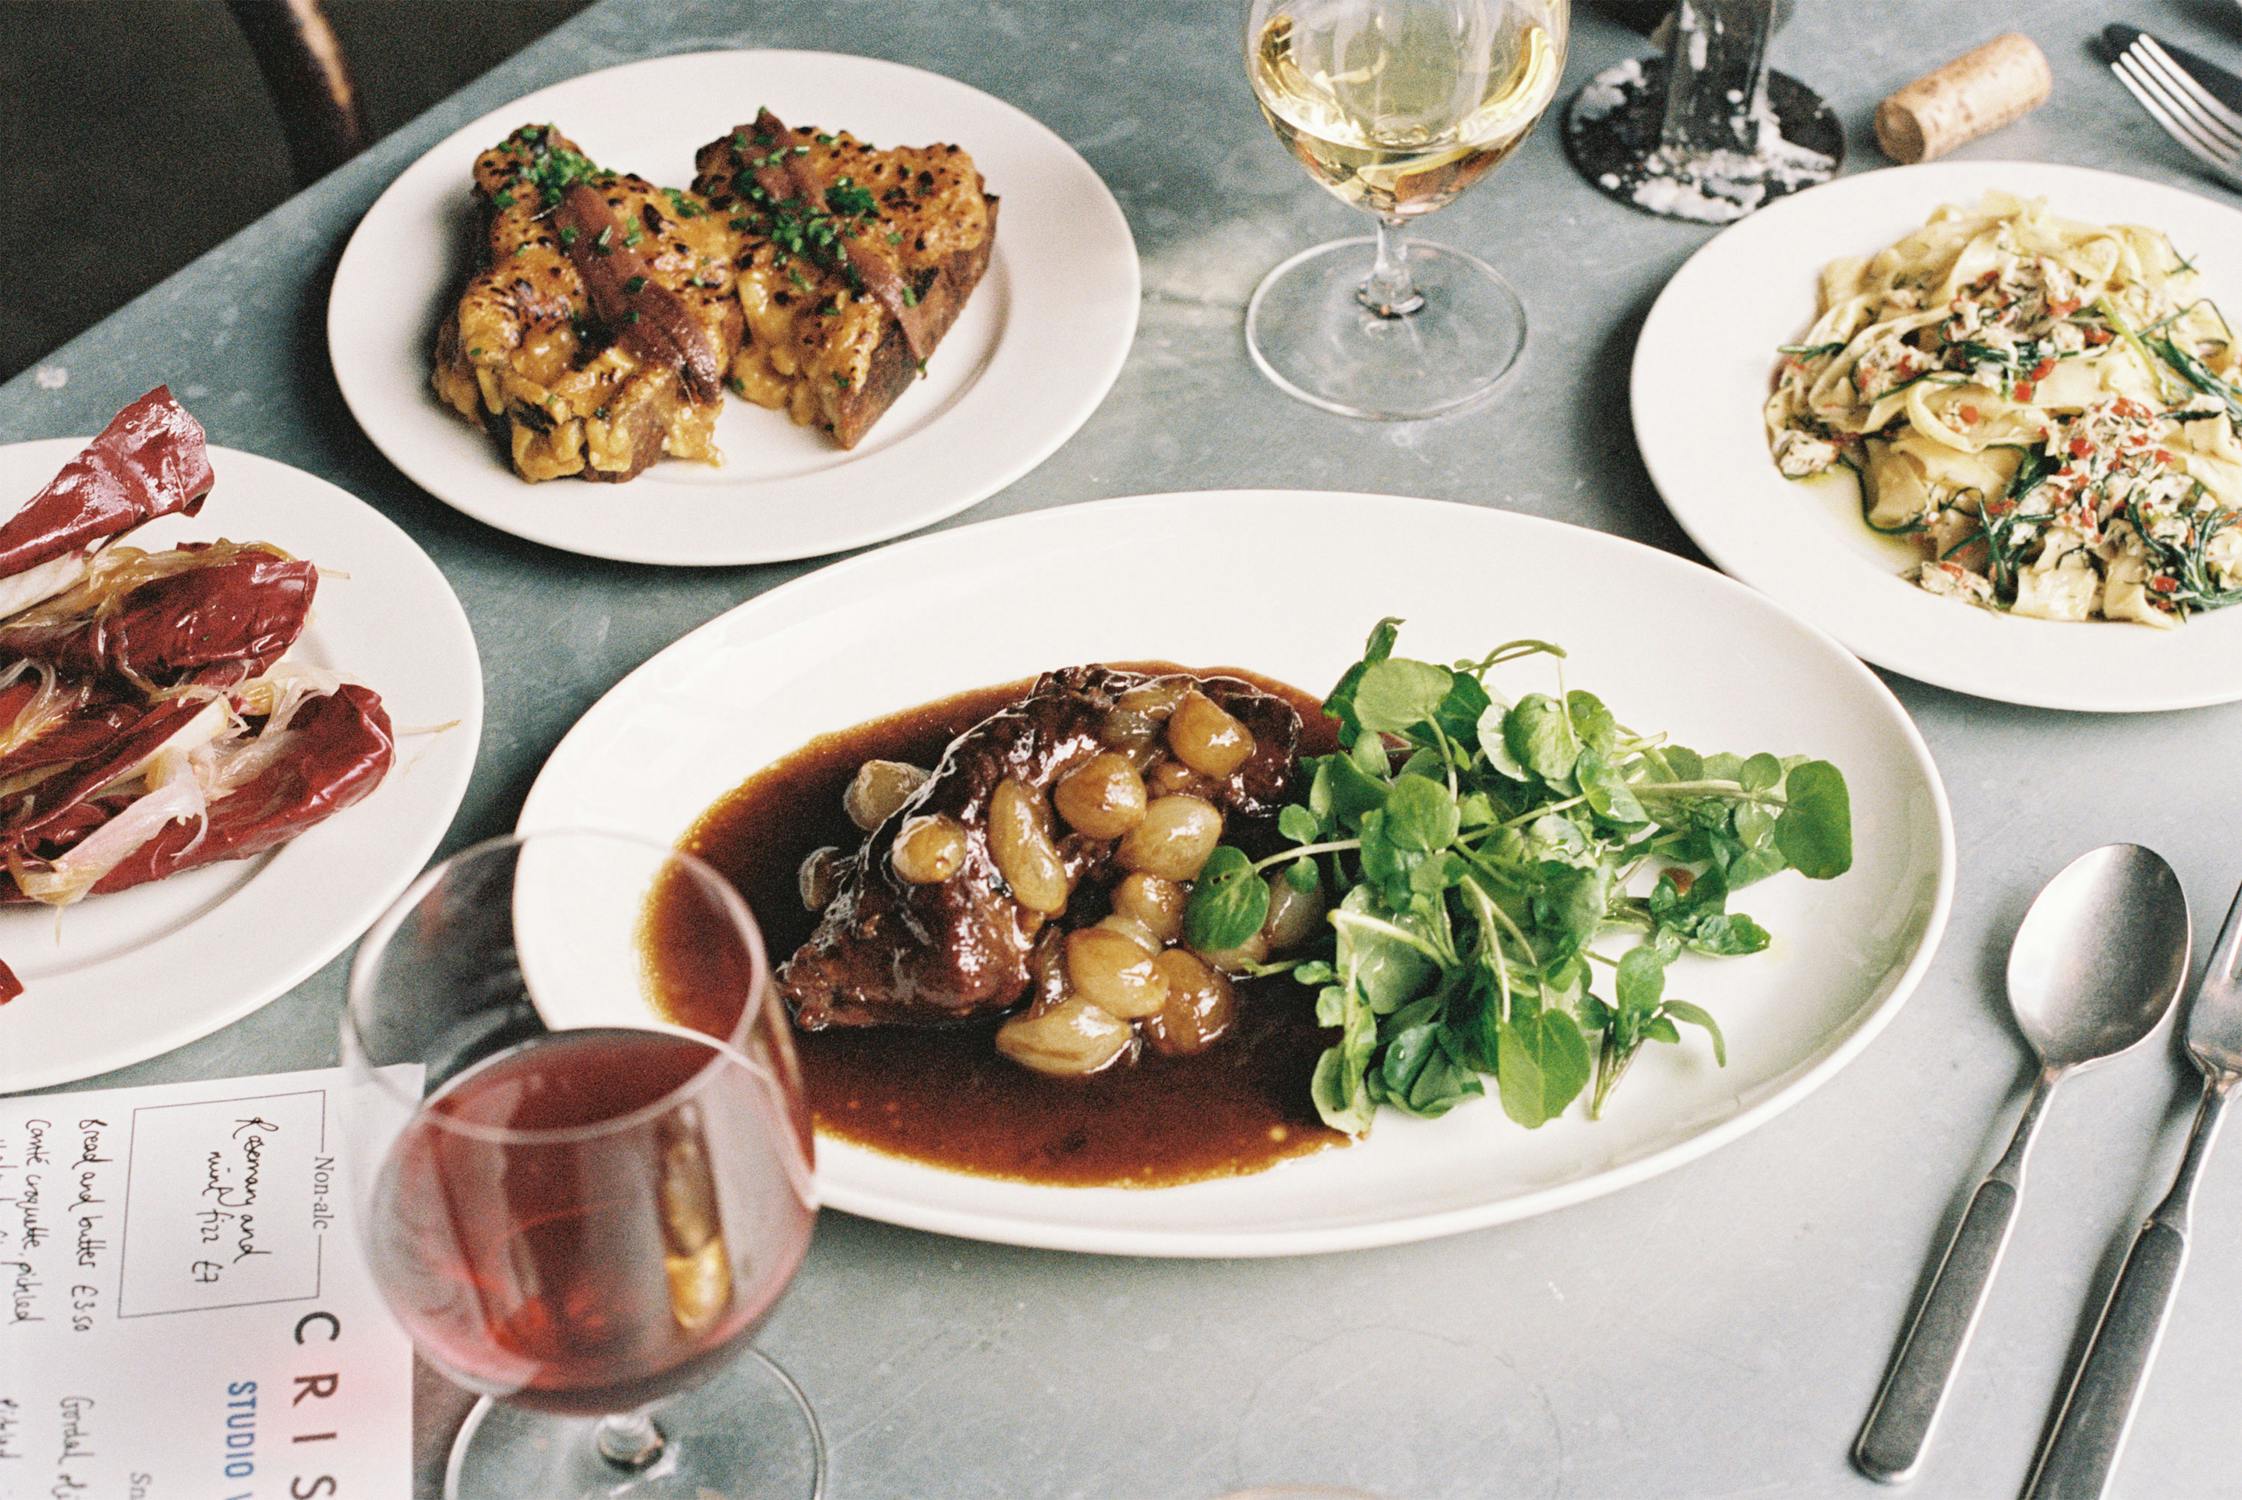 A photograph of a table with plates of food and drinks. In the centre there is a large serving plate with a steak and red wine sauce. There is a dressed salad, a plate of pasta. In the forground there is a large glass of red wine.